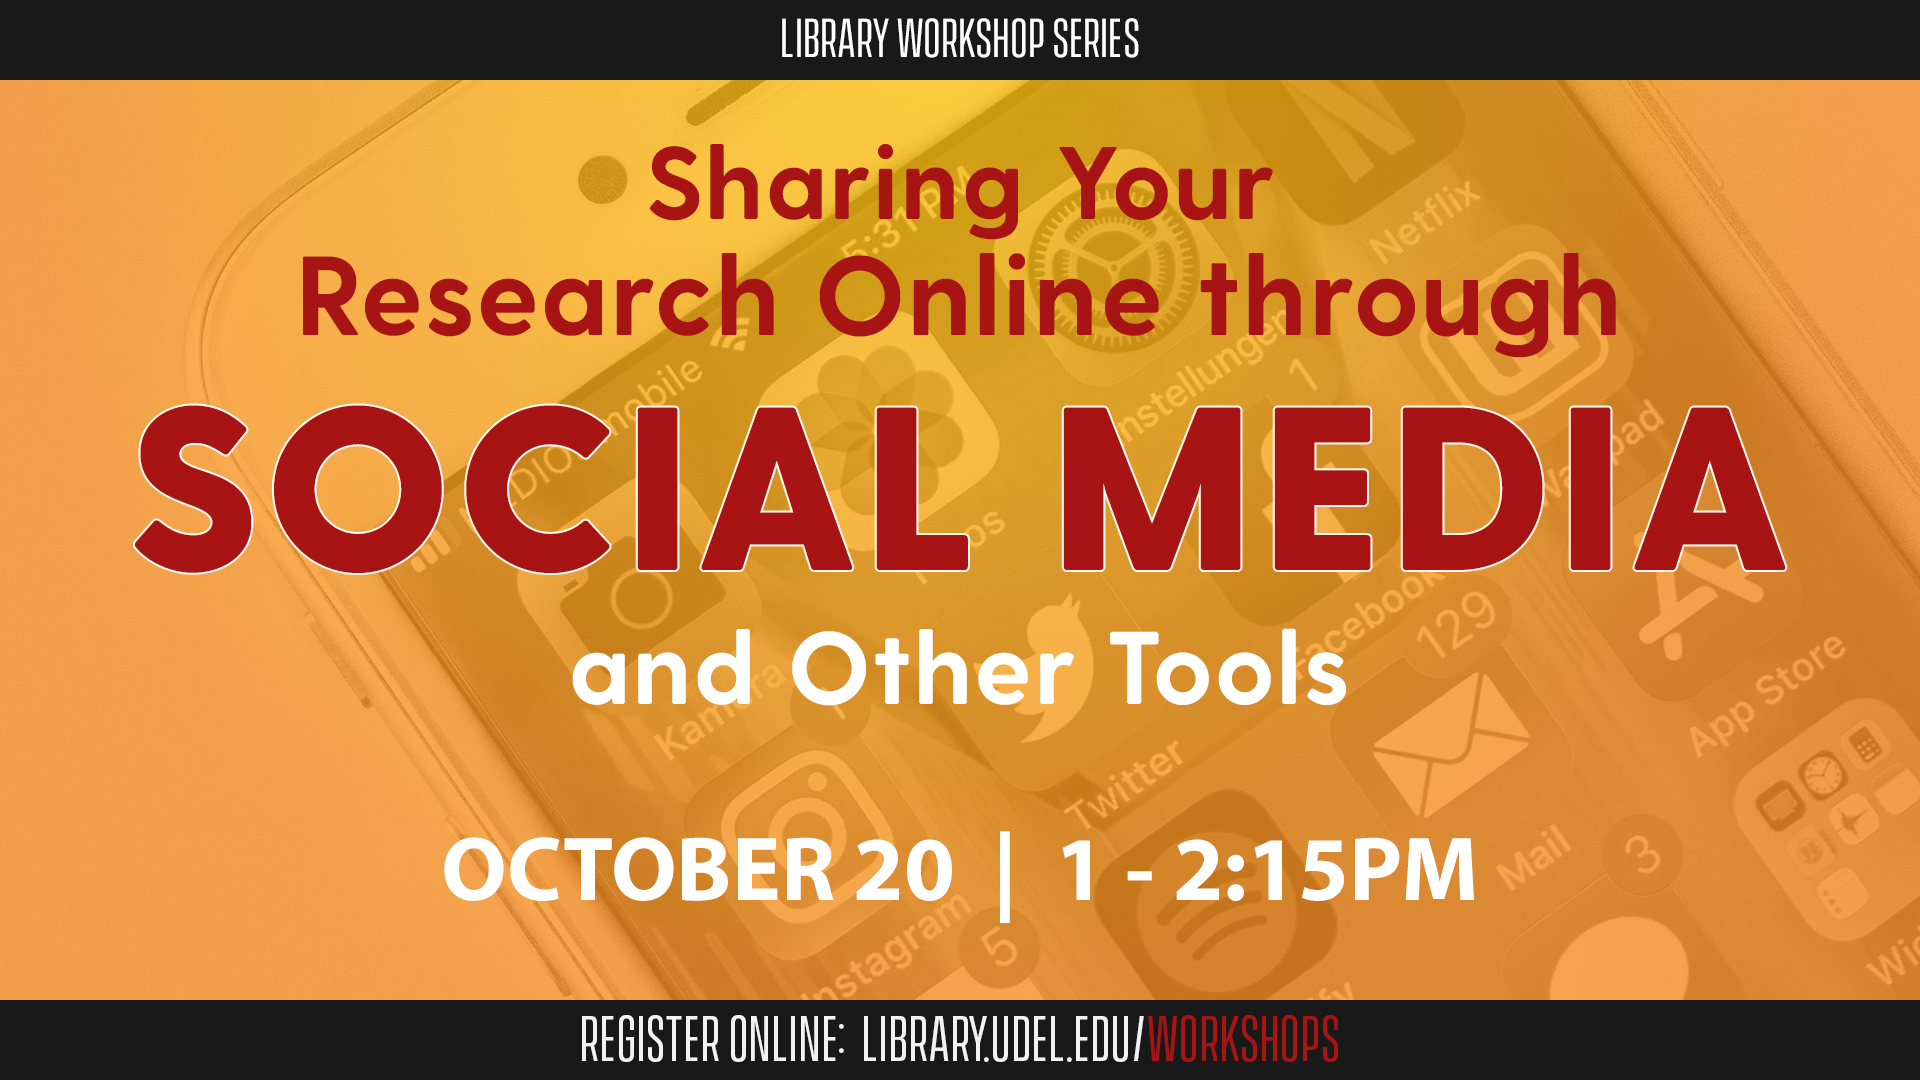 Sharing Your Research Online through Social Media and Other Tools